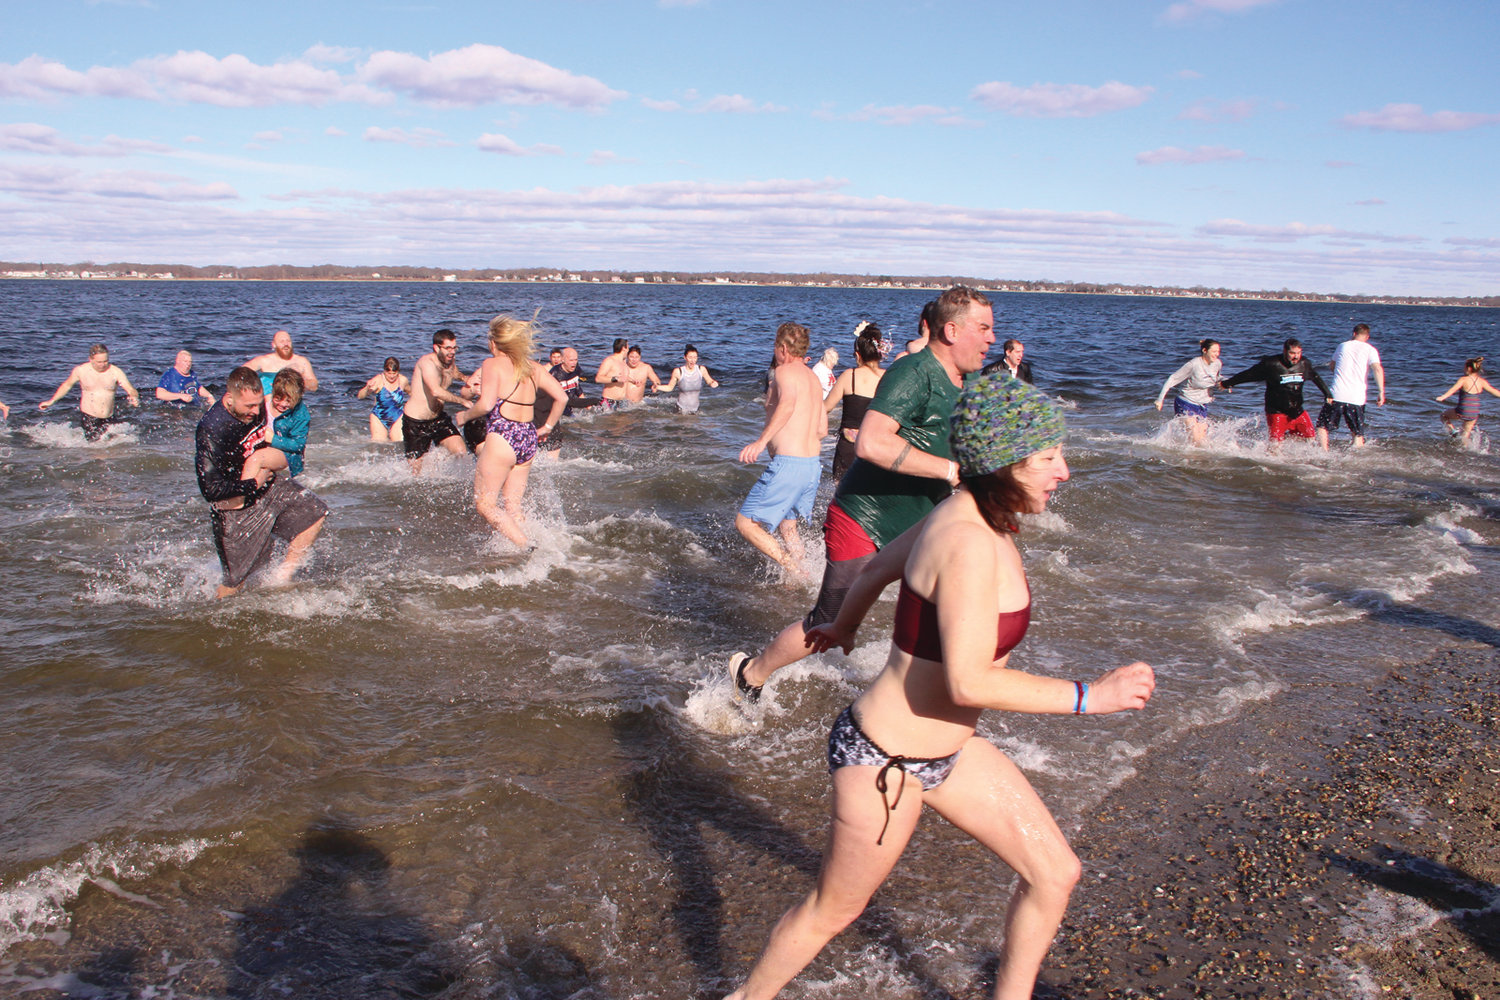 IN AND OUT: As quickly as participants raced into the water, those who preceded them ran to get out.